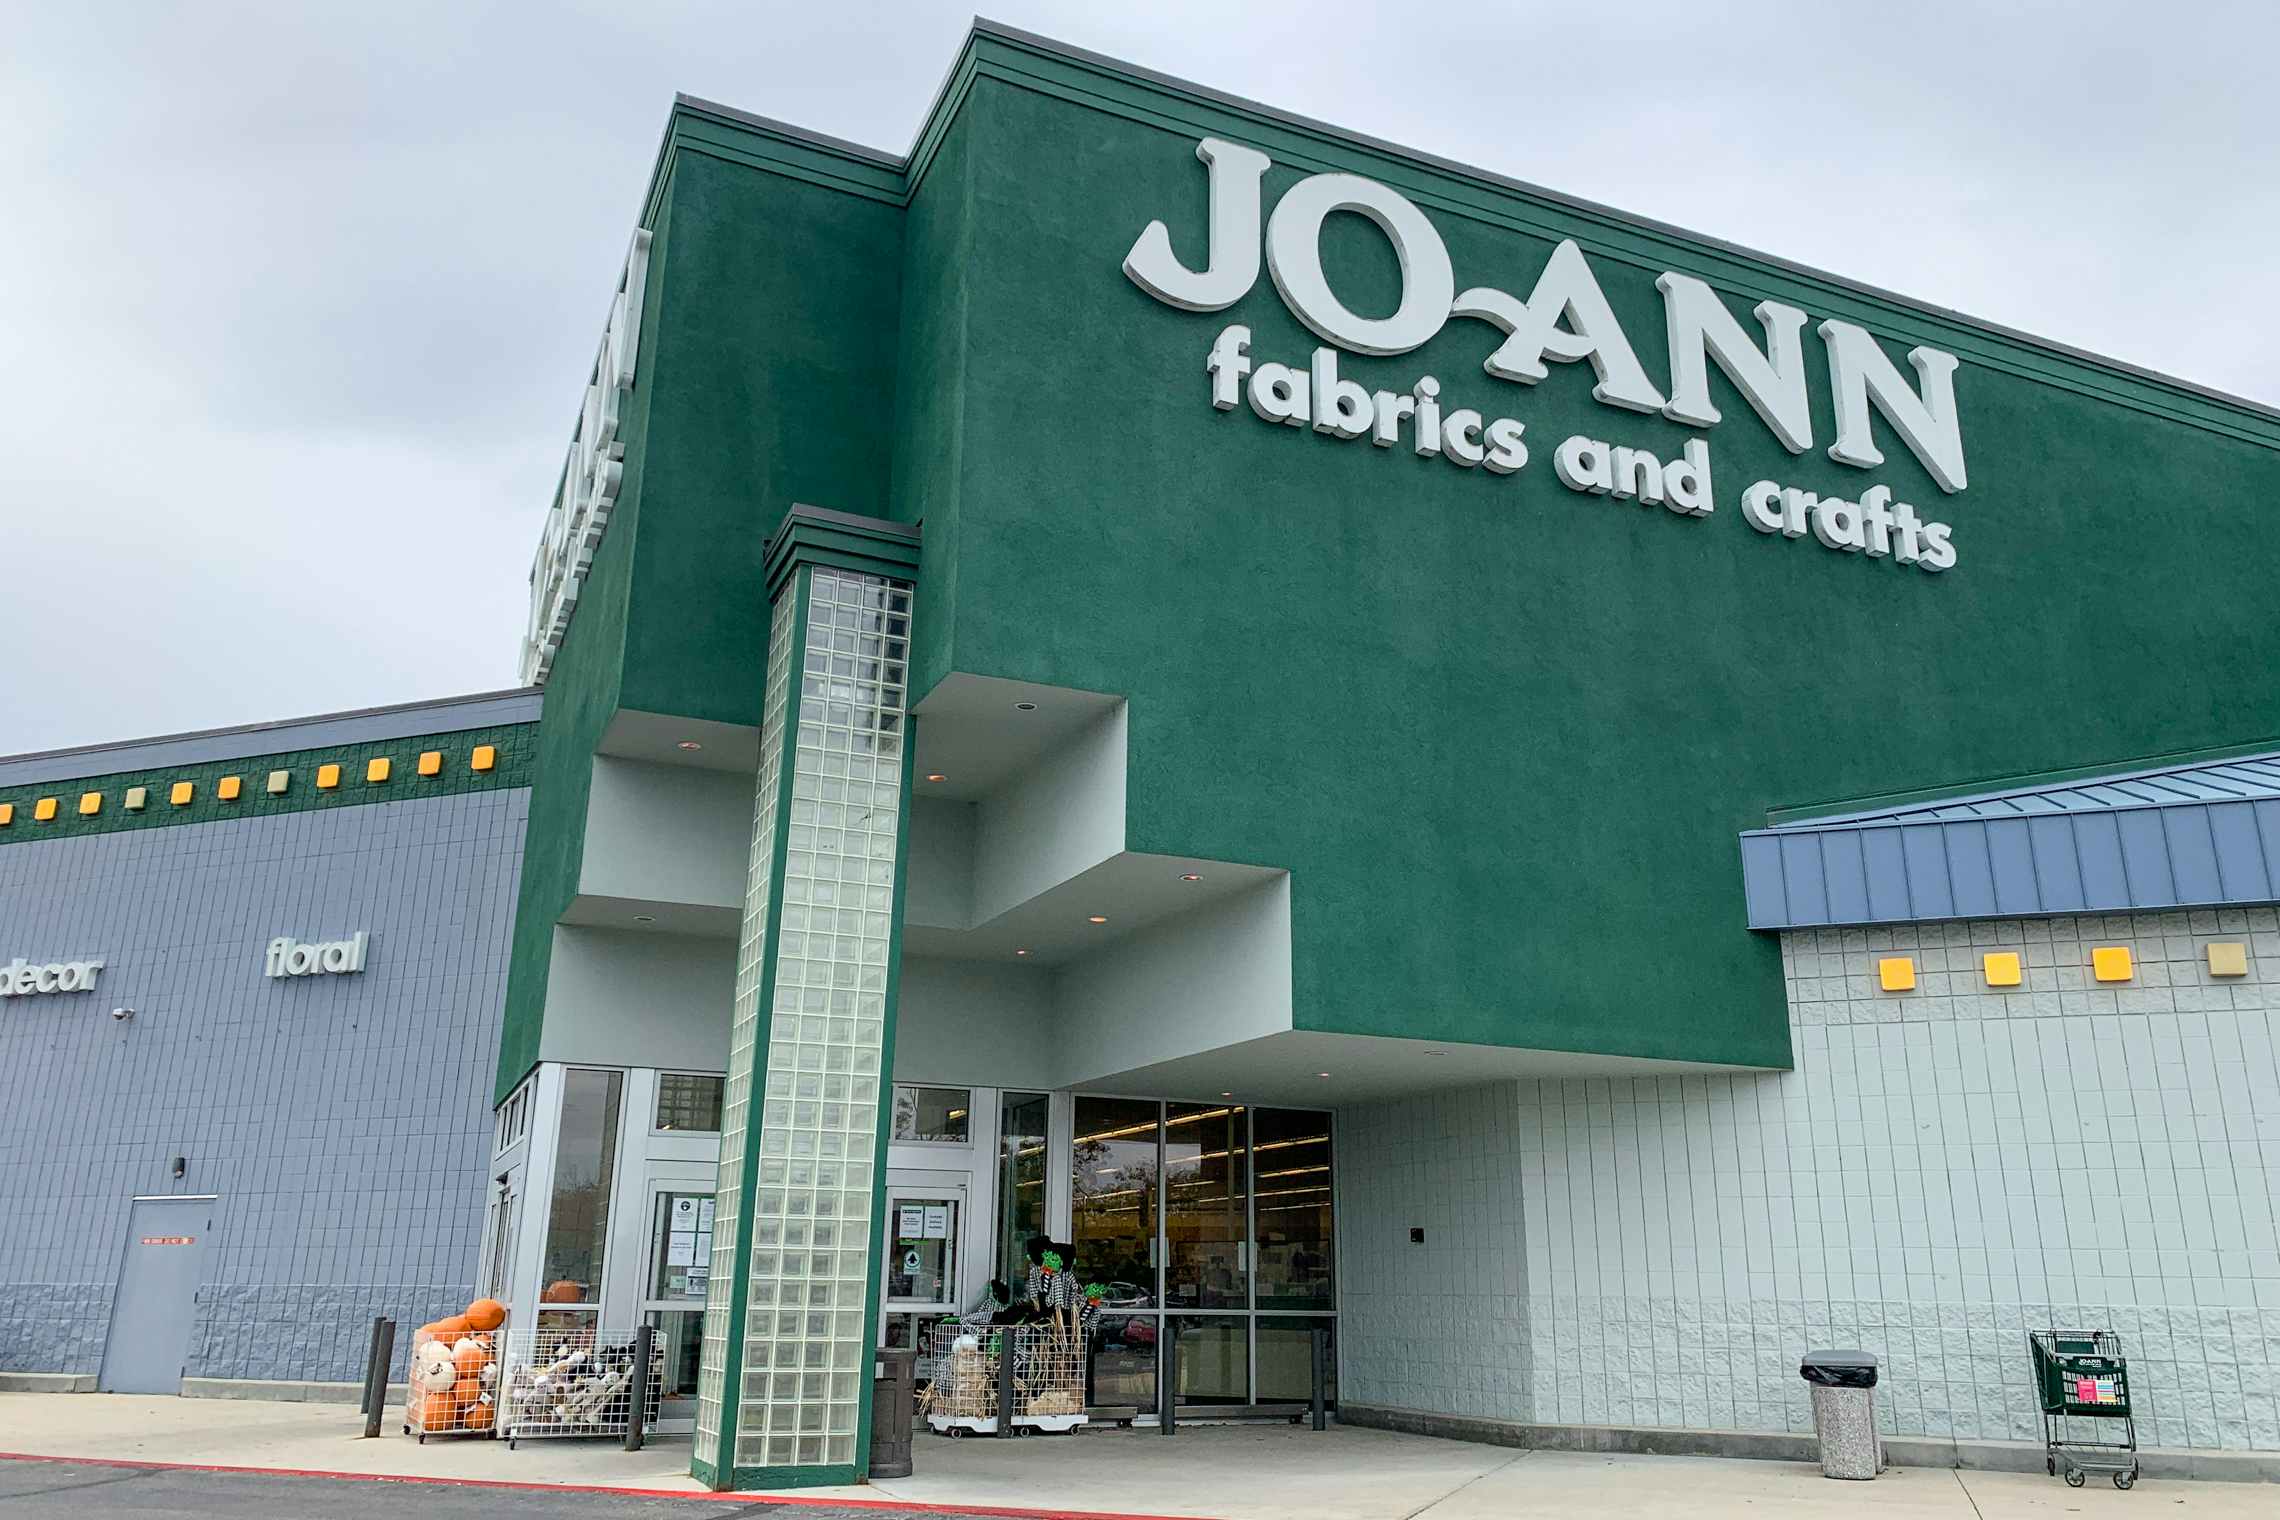 Joann fabric and crafts store, store front